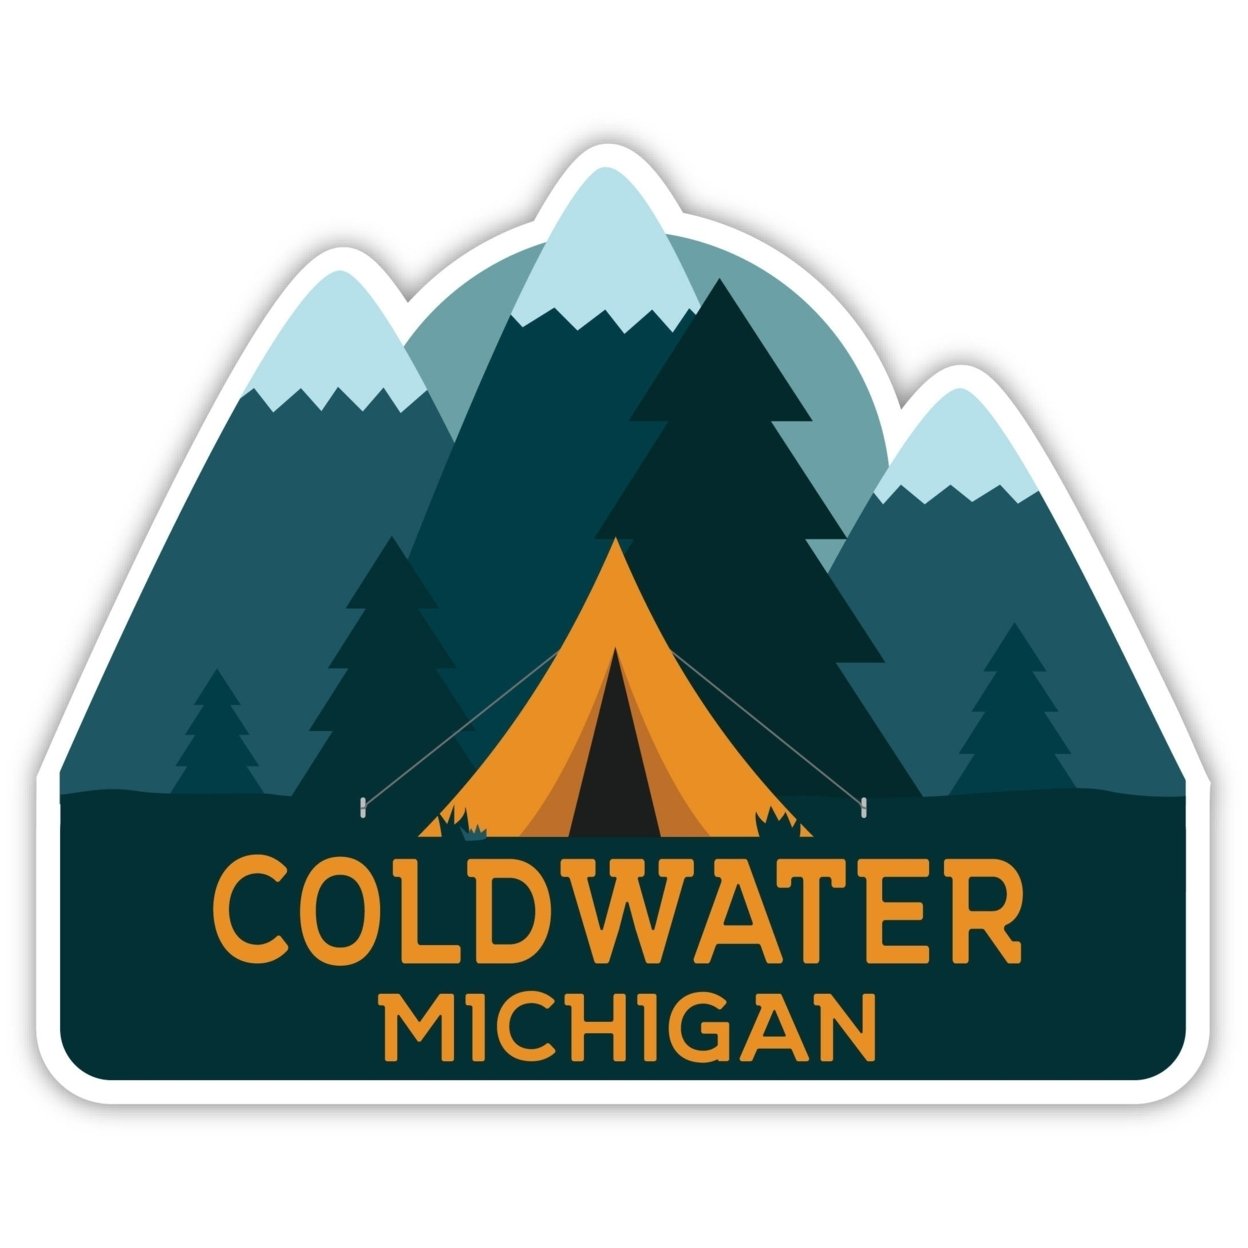 Coldwater Michigan Souvenir Decorative Stickers (Choose Theme And Size) - 4-Pack, 2-Inch, Tent